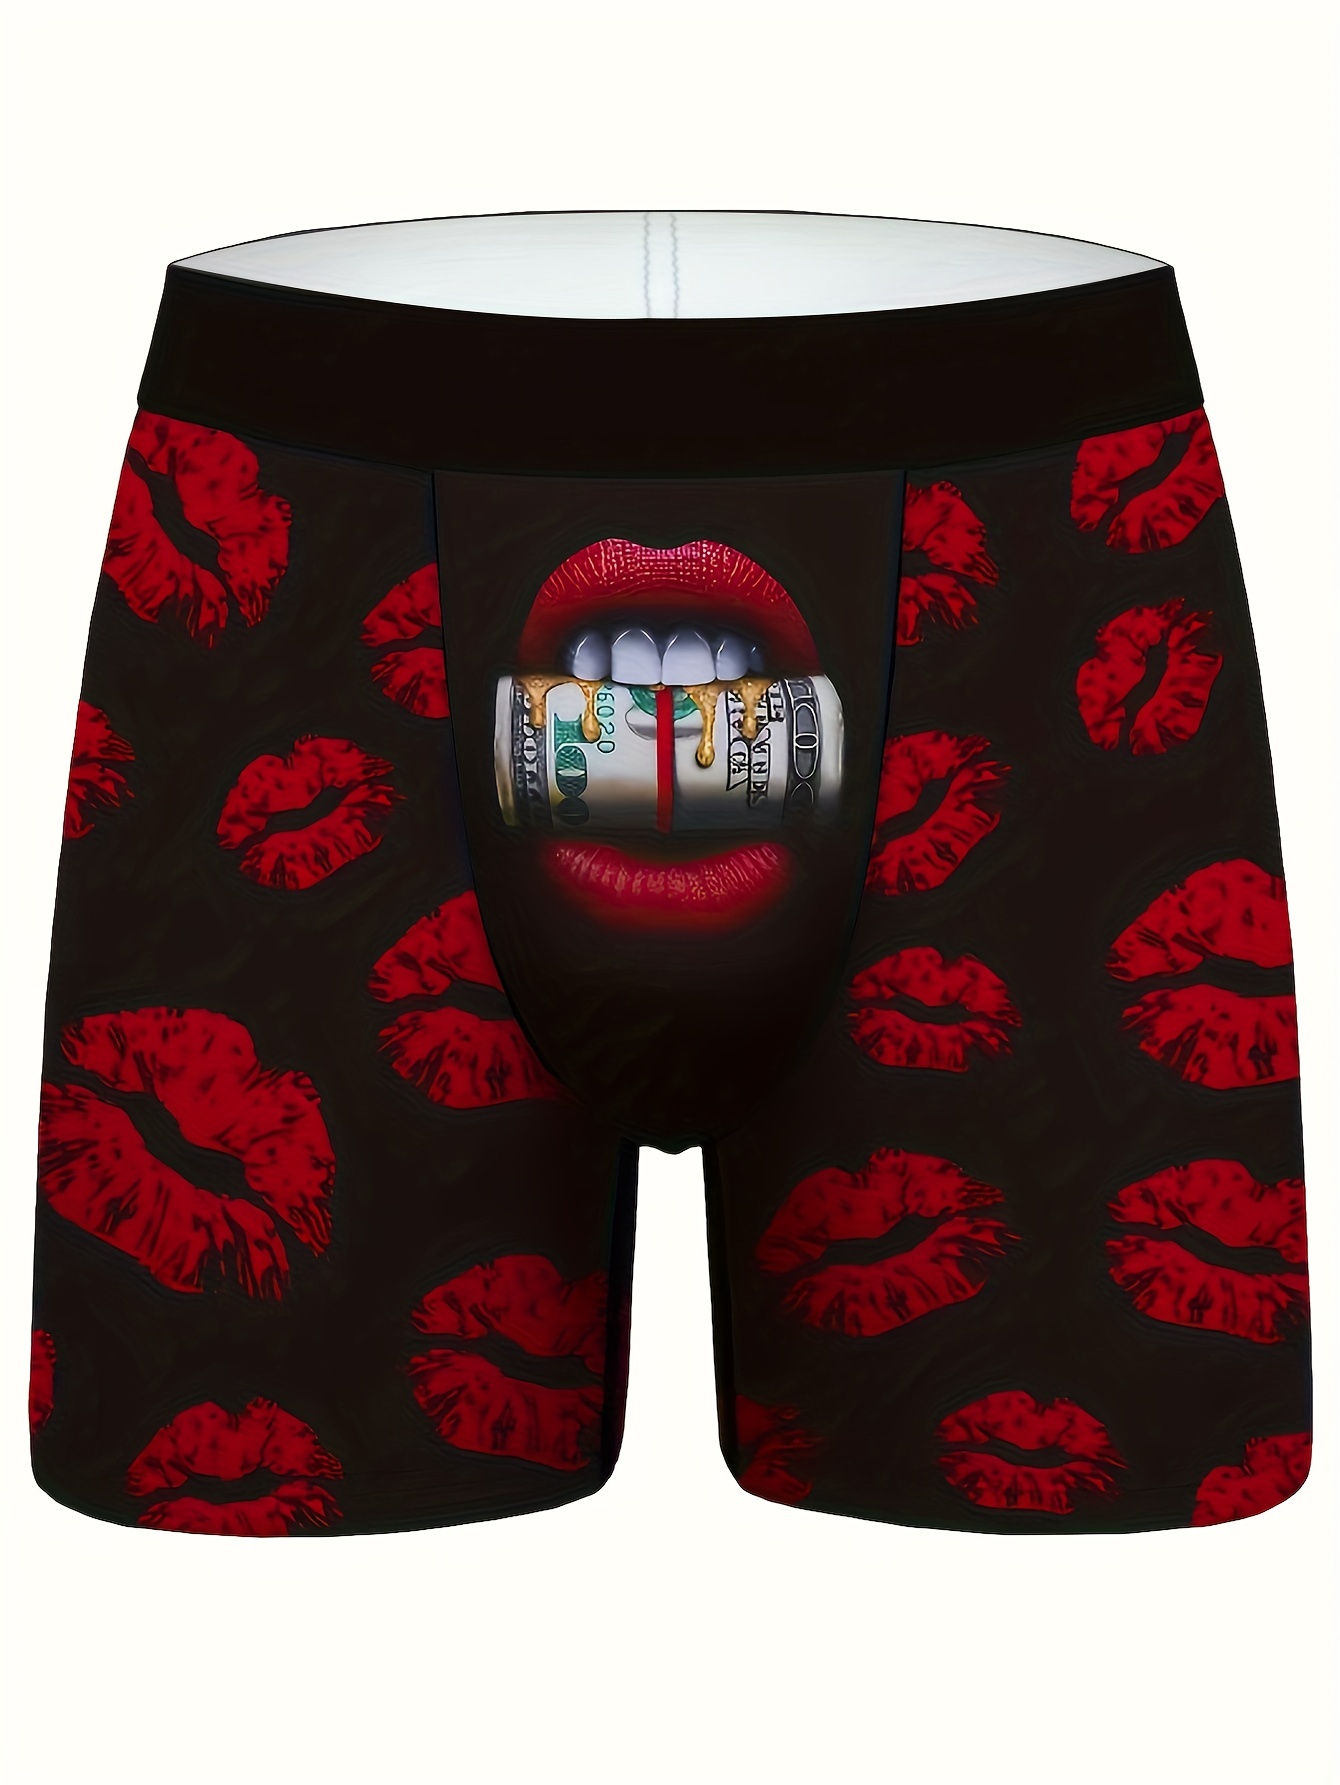 Funny Men's Boxer Briefs. the Man, the Legend Boxers, Gift for Him. Sexy  Men's Boxers, Novelty Gift for Him, Funny Men's Underwear, -  Canada